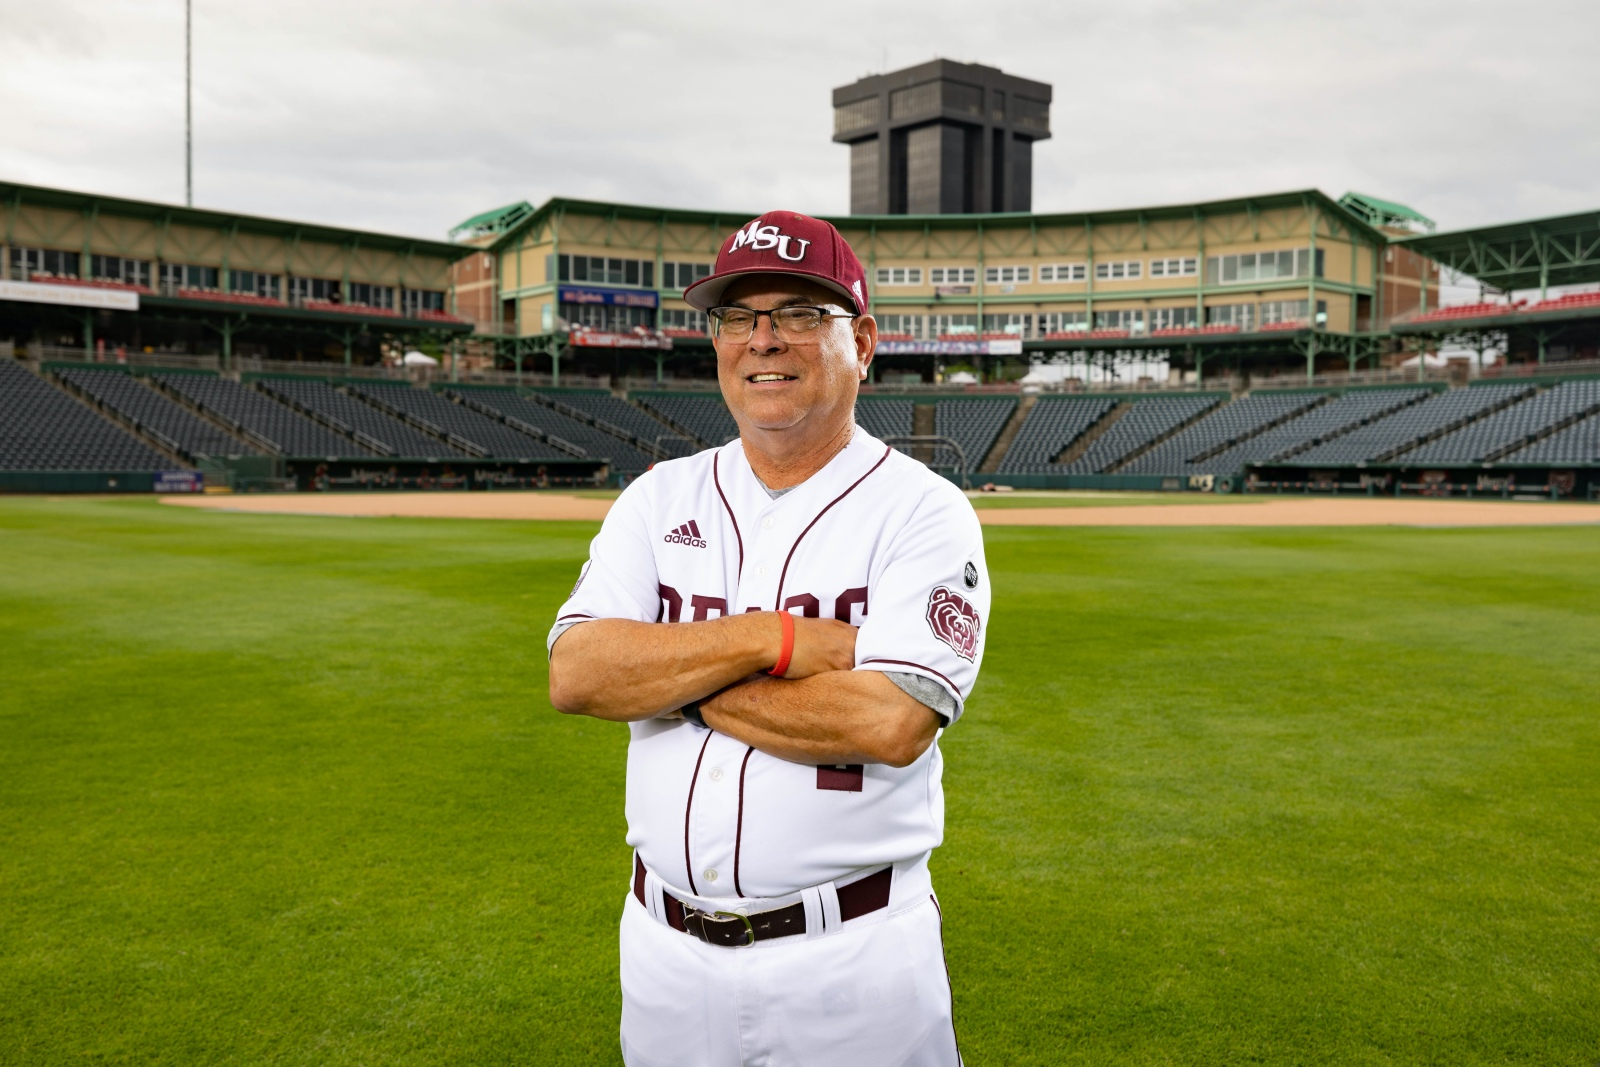 Missouri State baseball coach Keith Guttin stands in the outfield at Hammons Field, with the stands behind him.